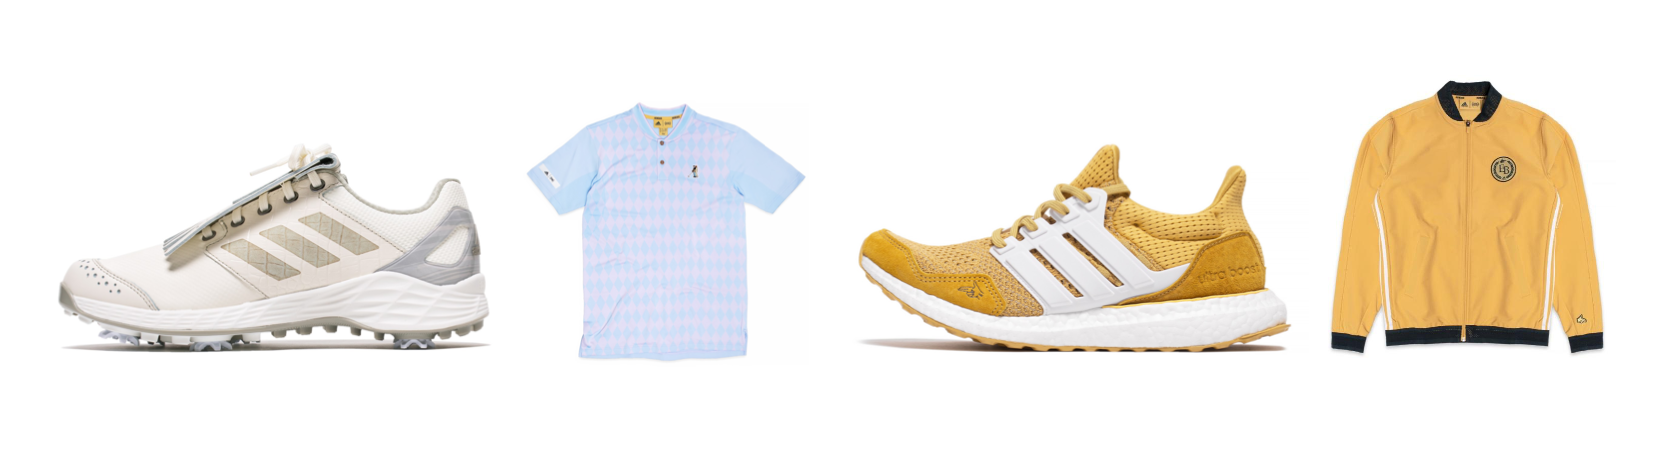 Extra Butter x Adidas Golf &#x27;Happy Gilmore&#x27; Collection